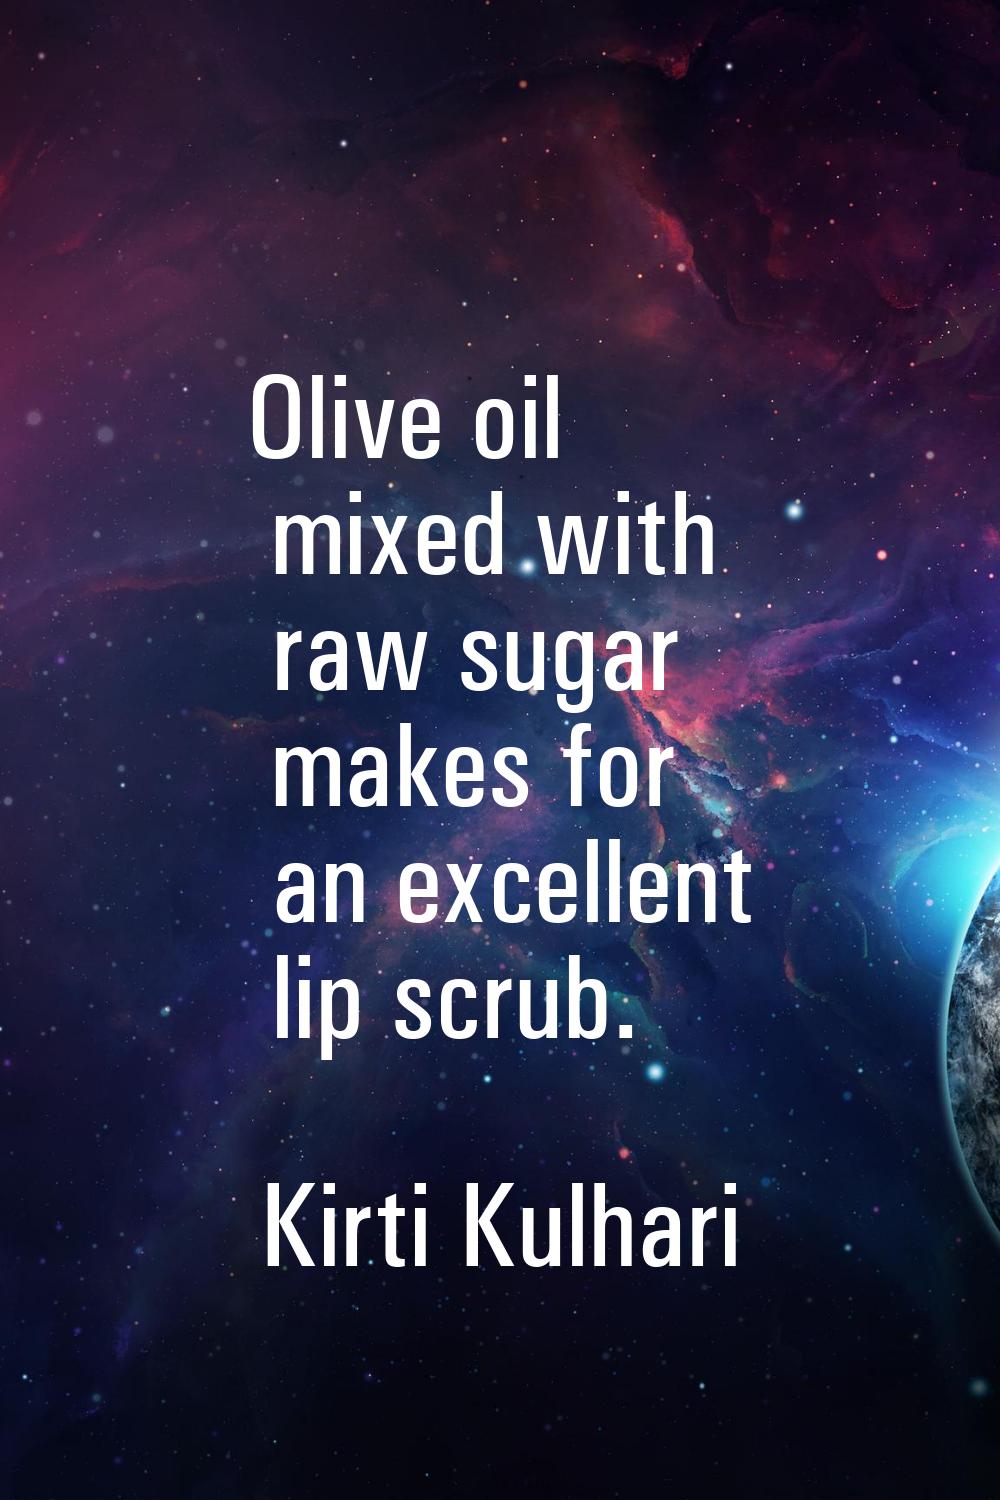 Olive oil mixed with raw sugar makes for an excellent lip scrub.